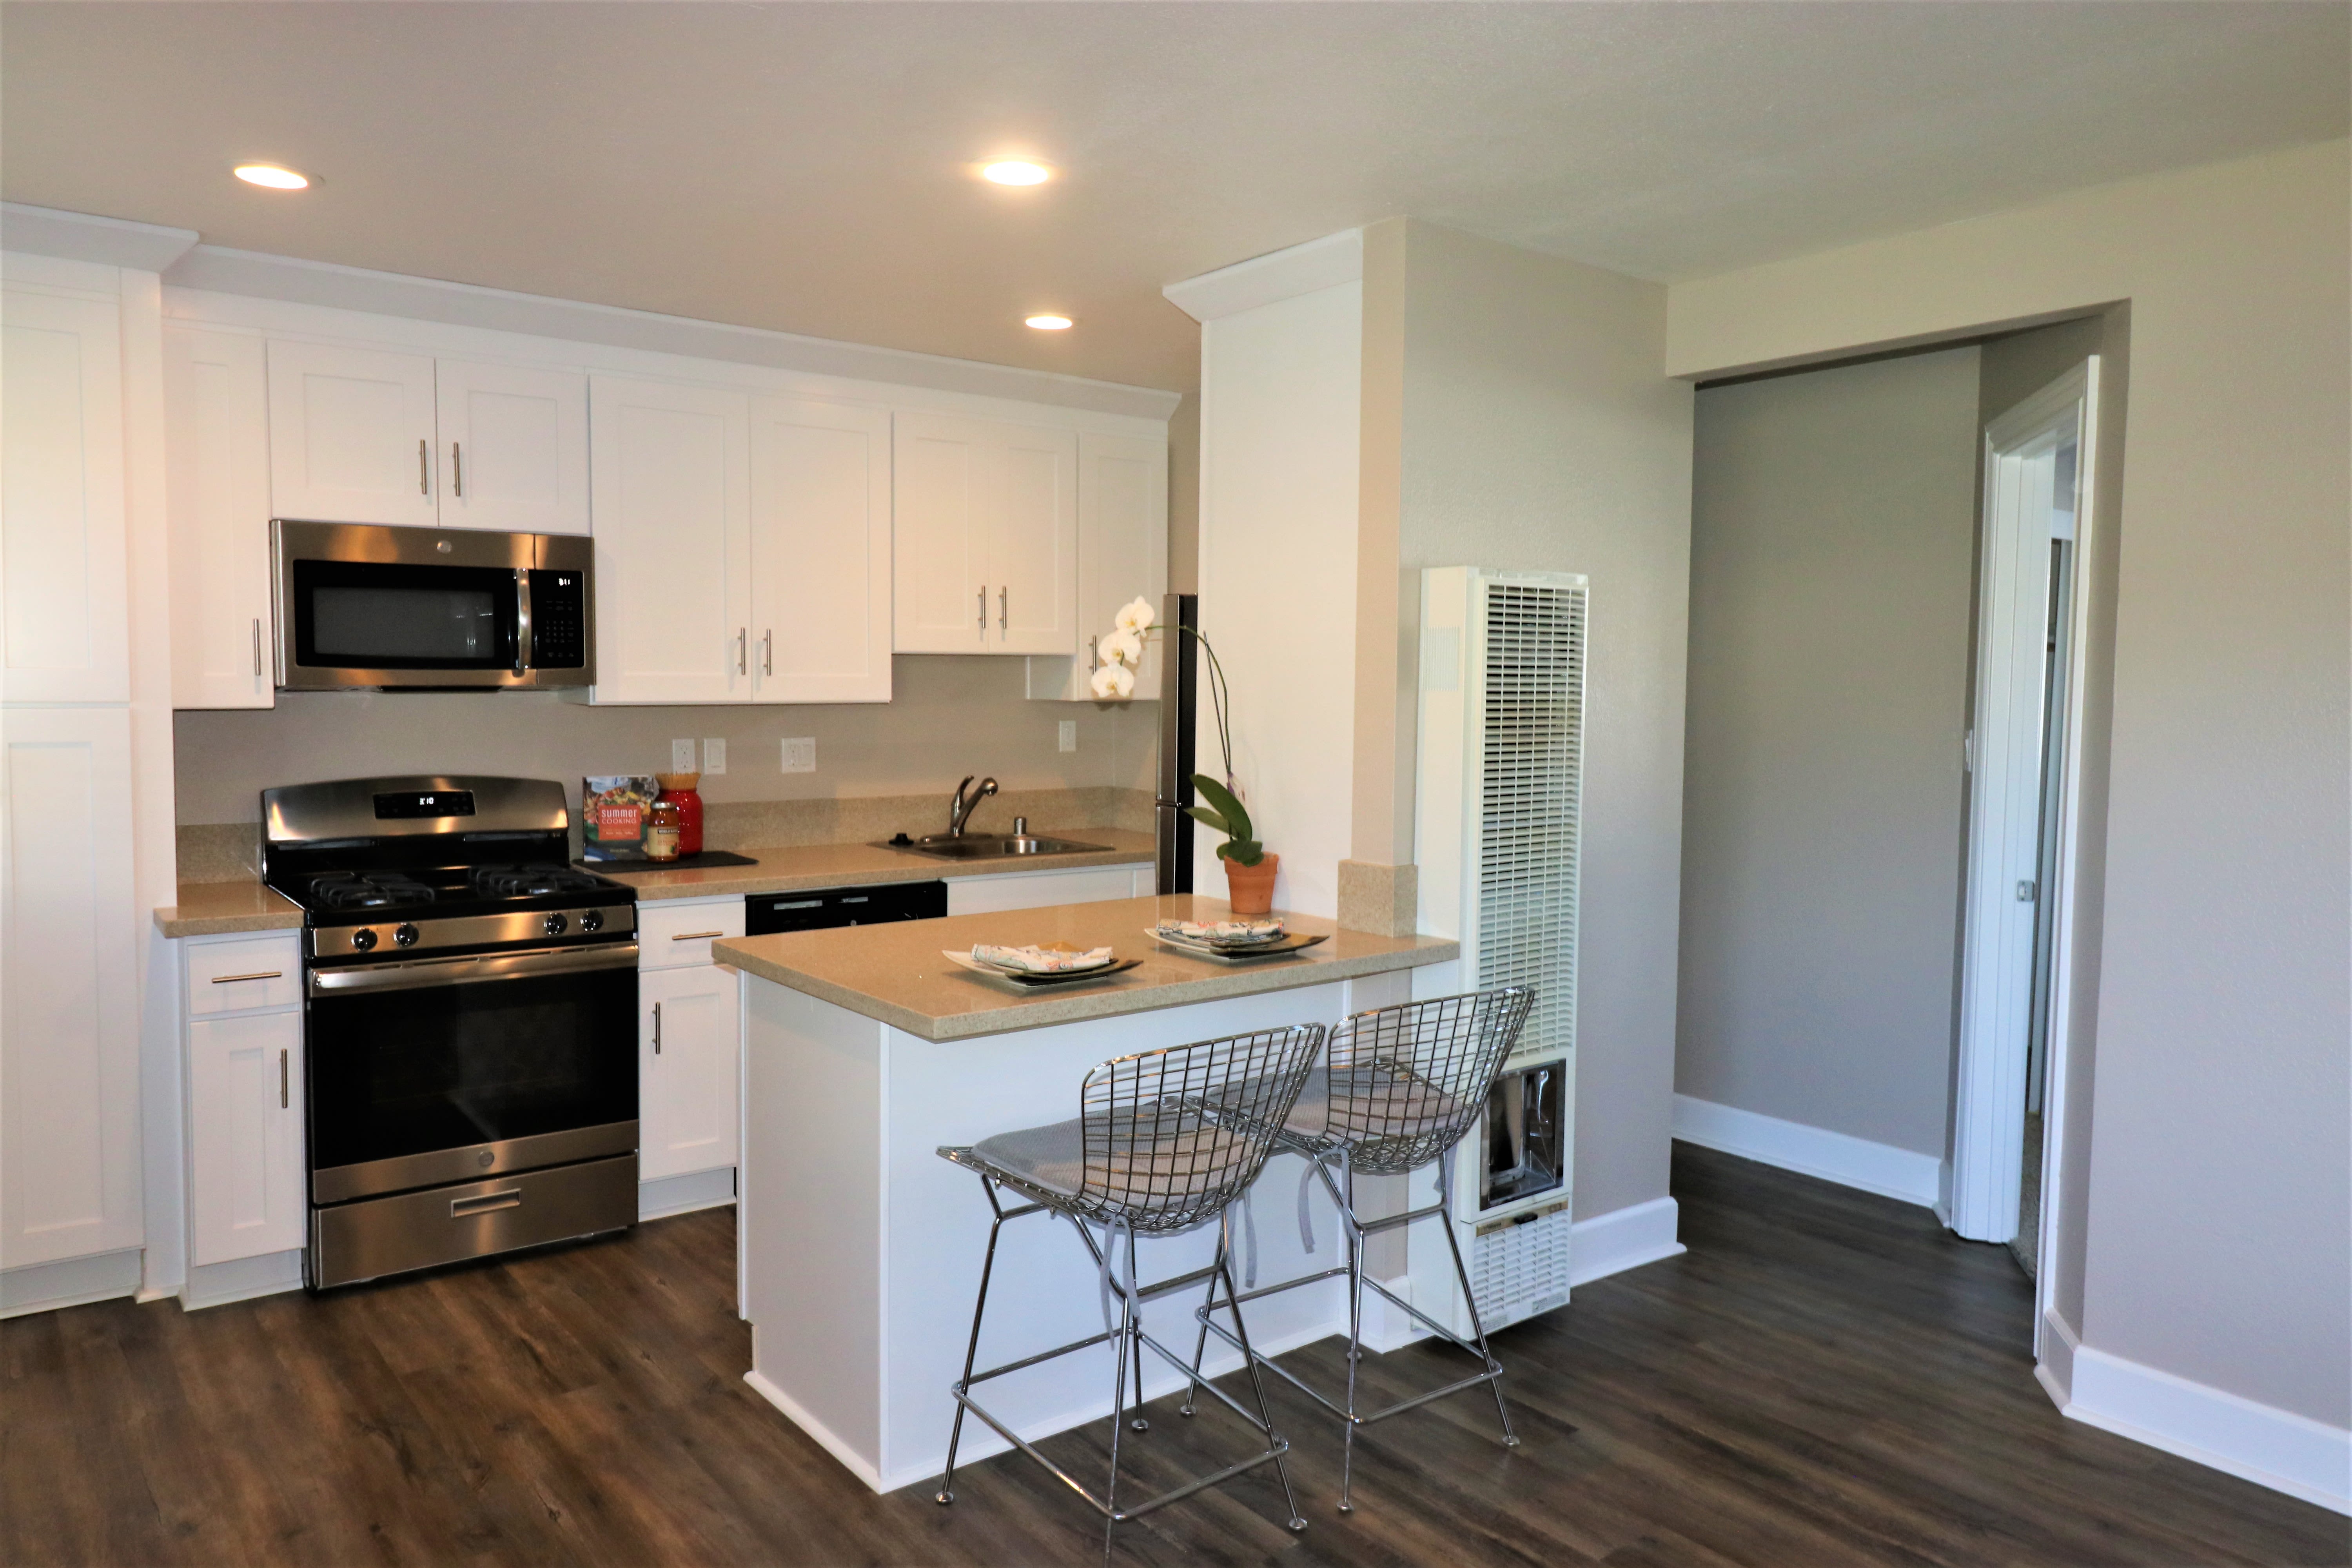 Kitchen with shiny stainless-steel appliances and breakfast counter at Bon Aire Apartments in Castro Valley, California